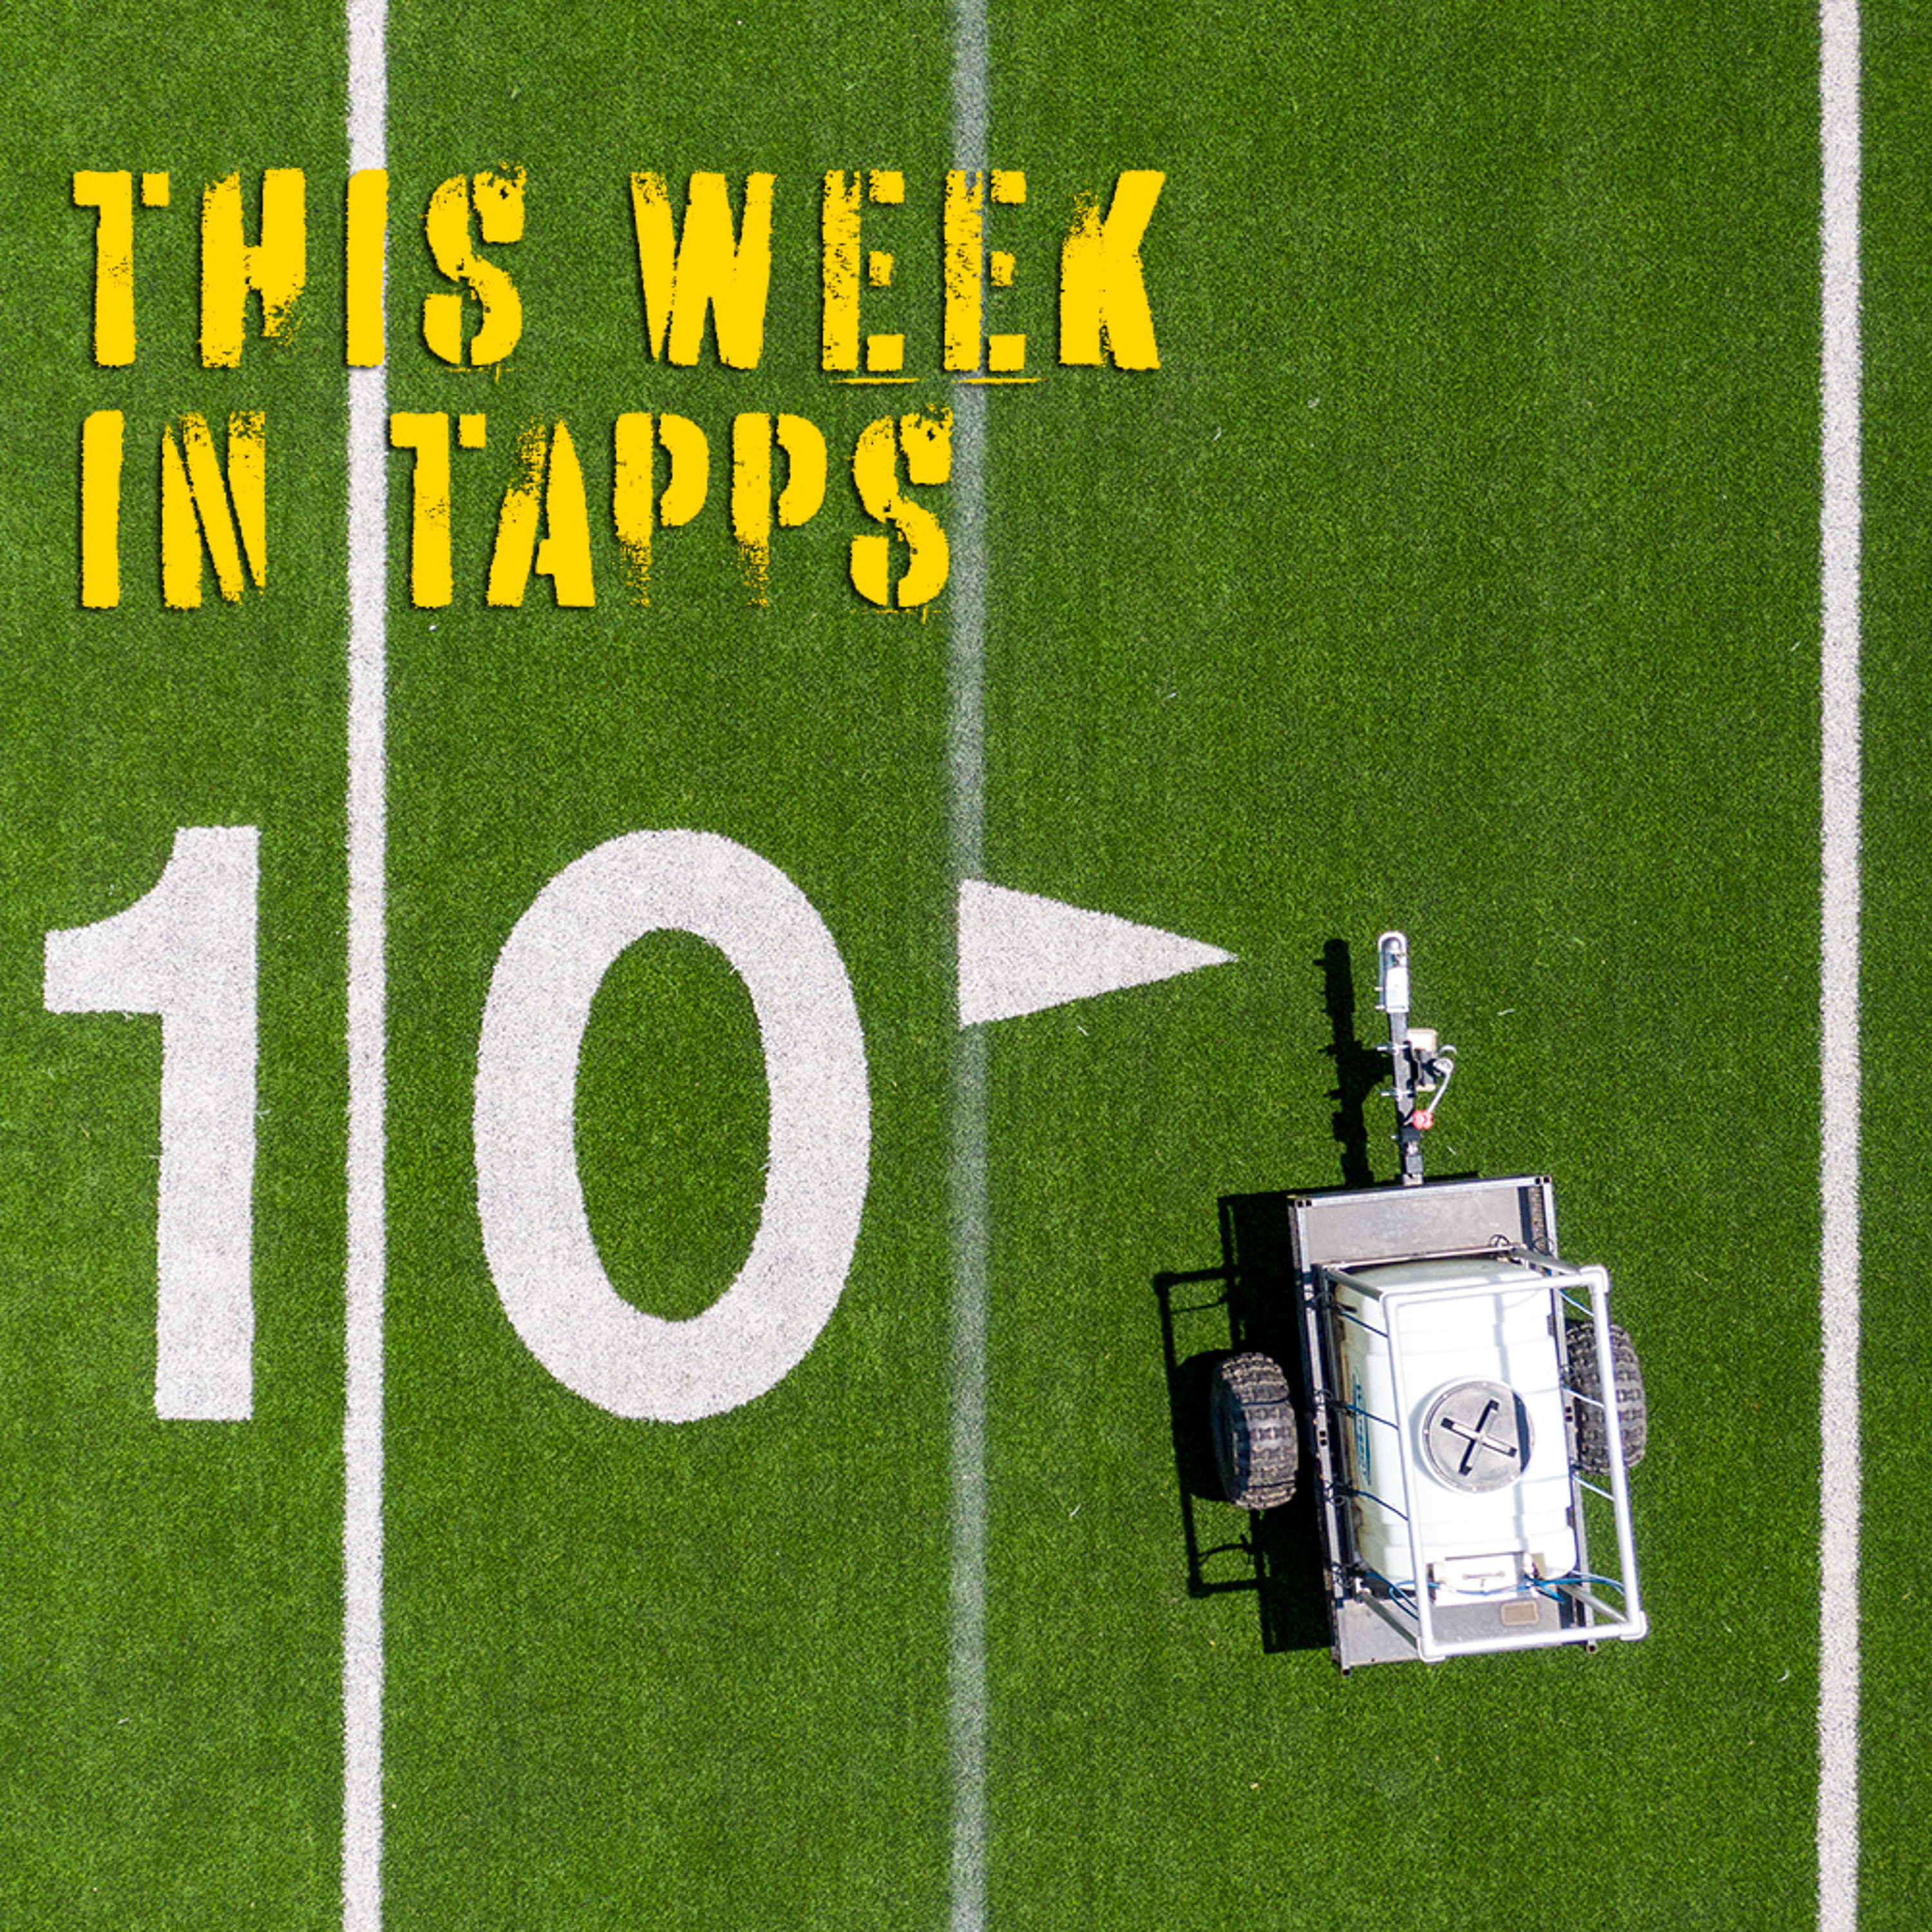 This Week in TAPPS 7-31-23